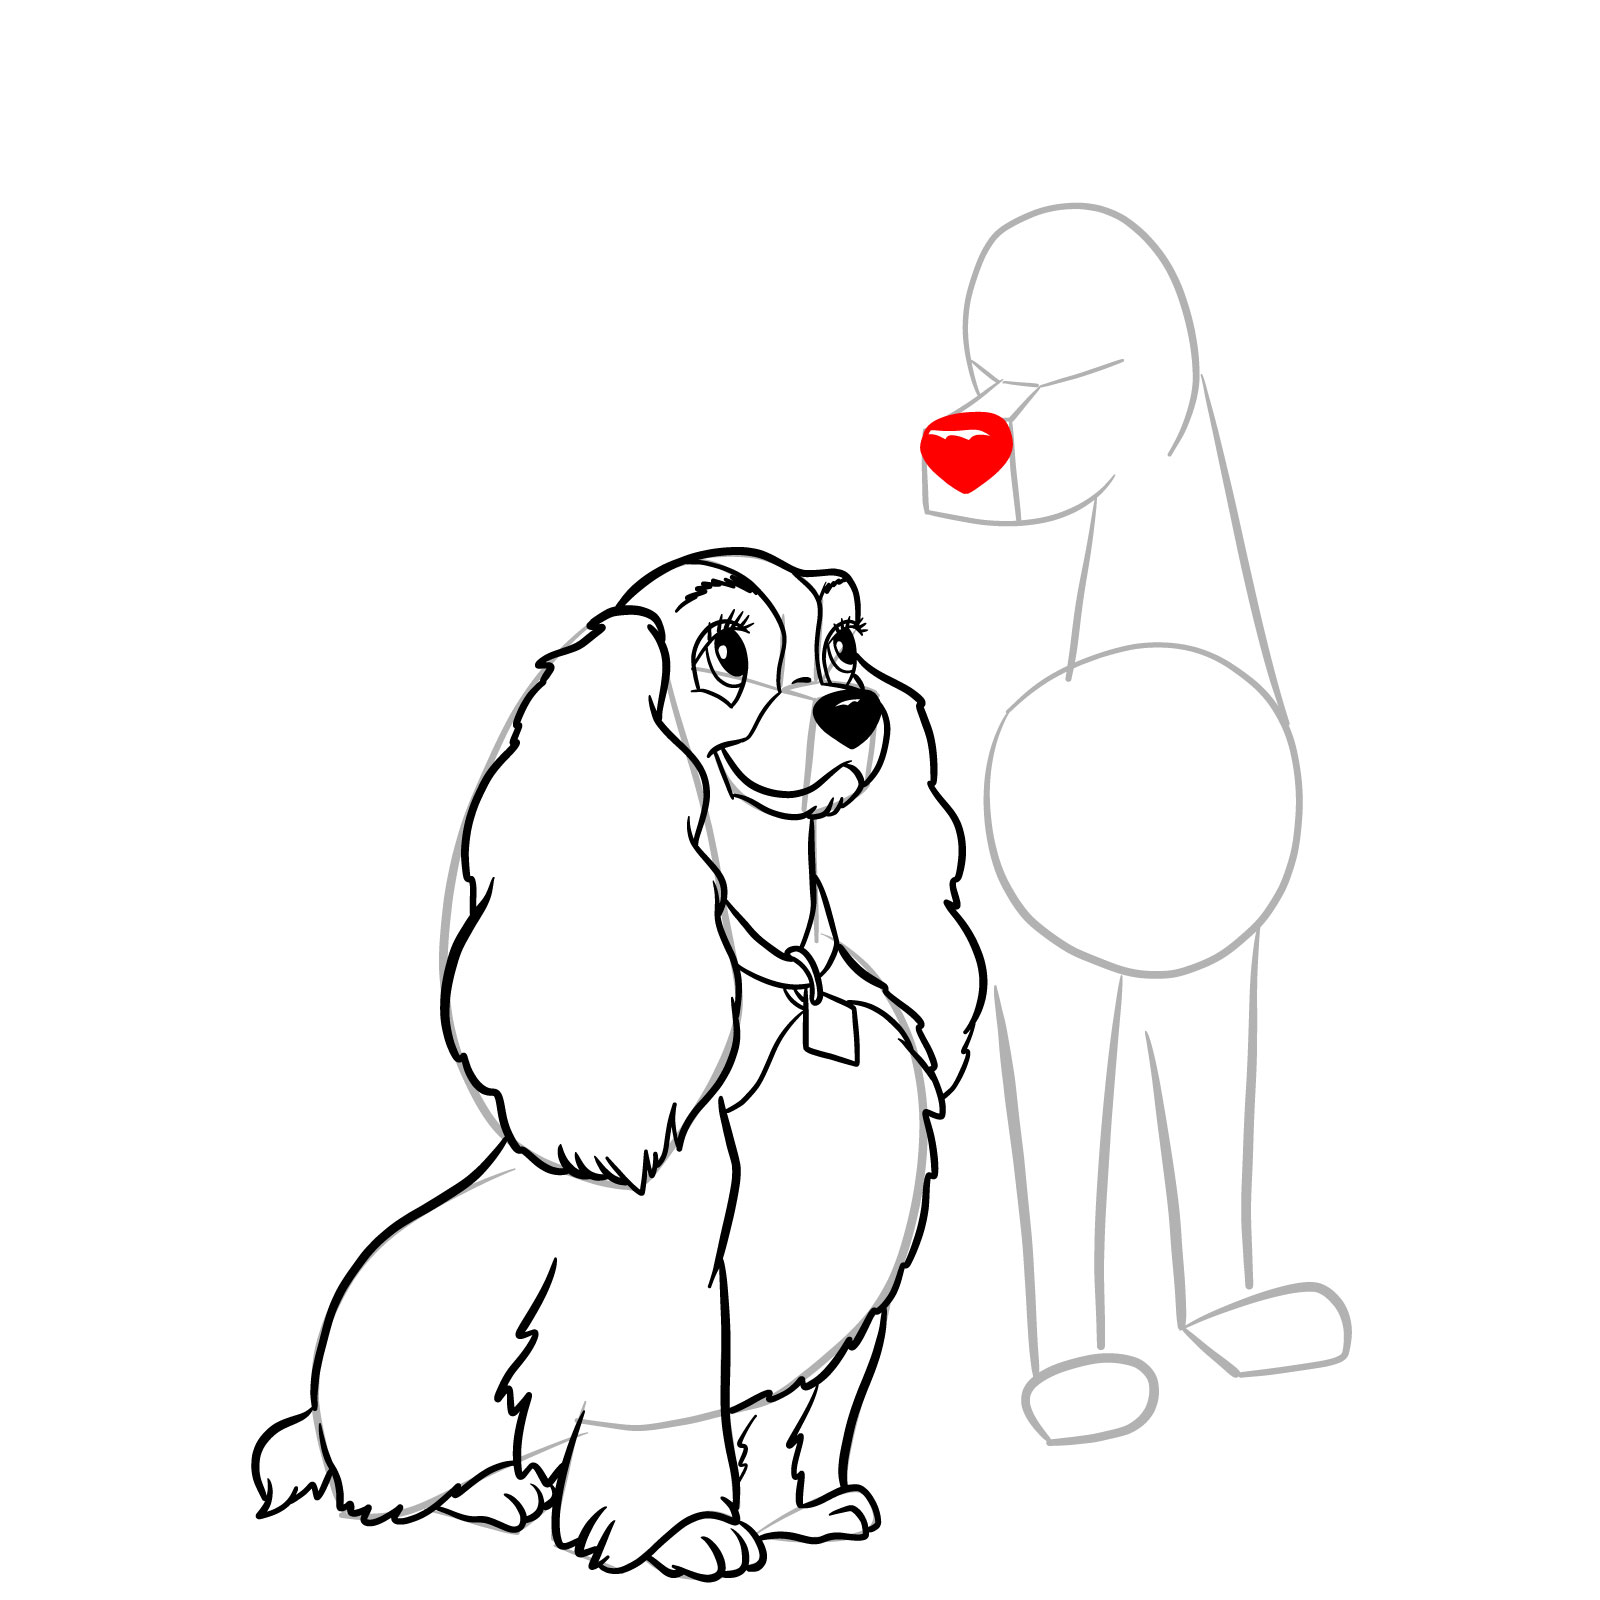 How to draw Lady and Tramp together - step 23